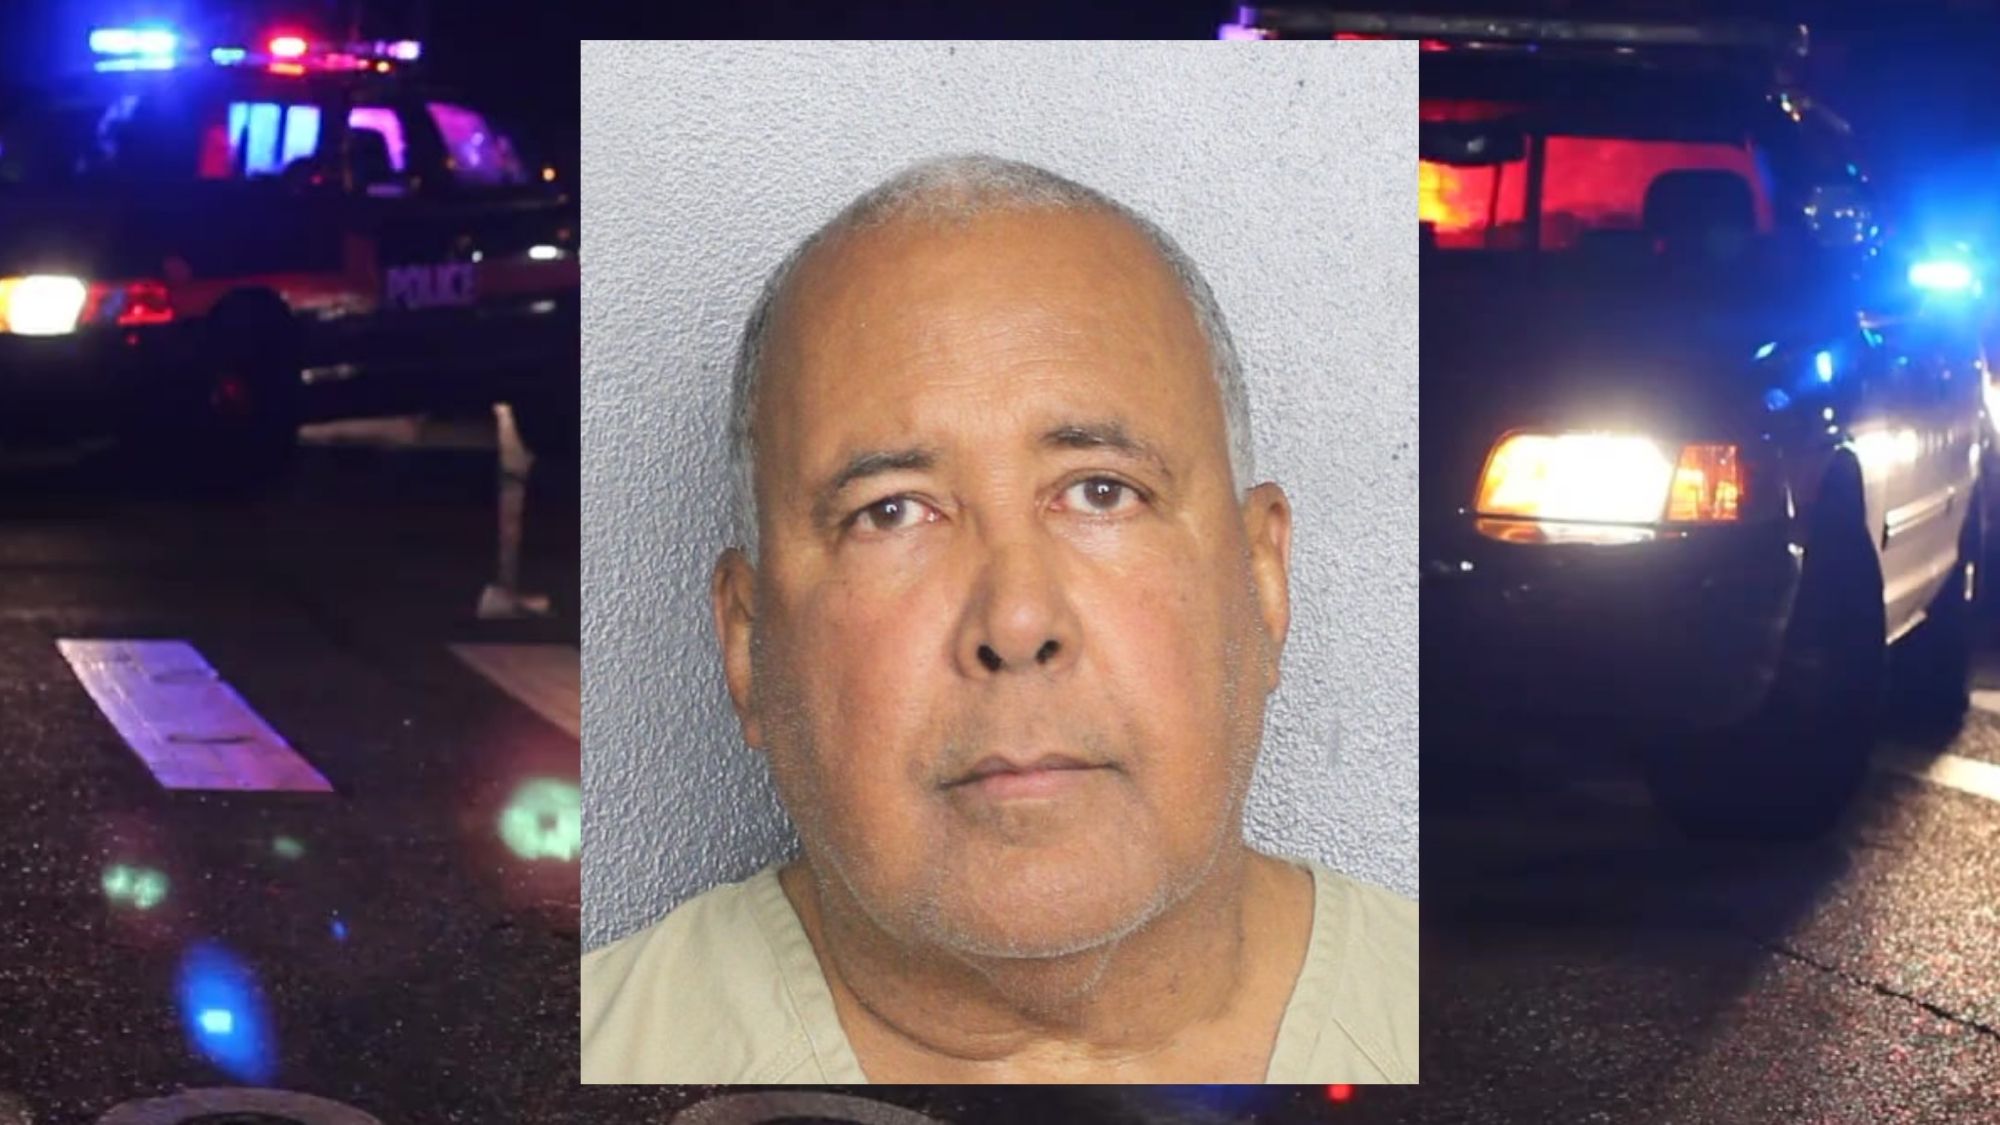 Frustration Over Delayed Immigration Approval Leads to Violent Assault of Woman in Tamarac